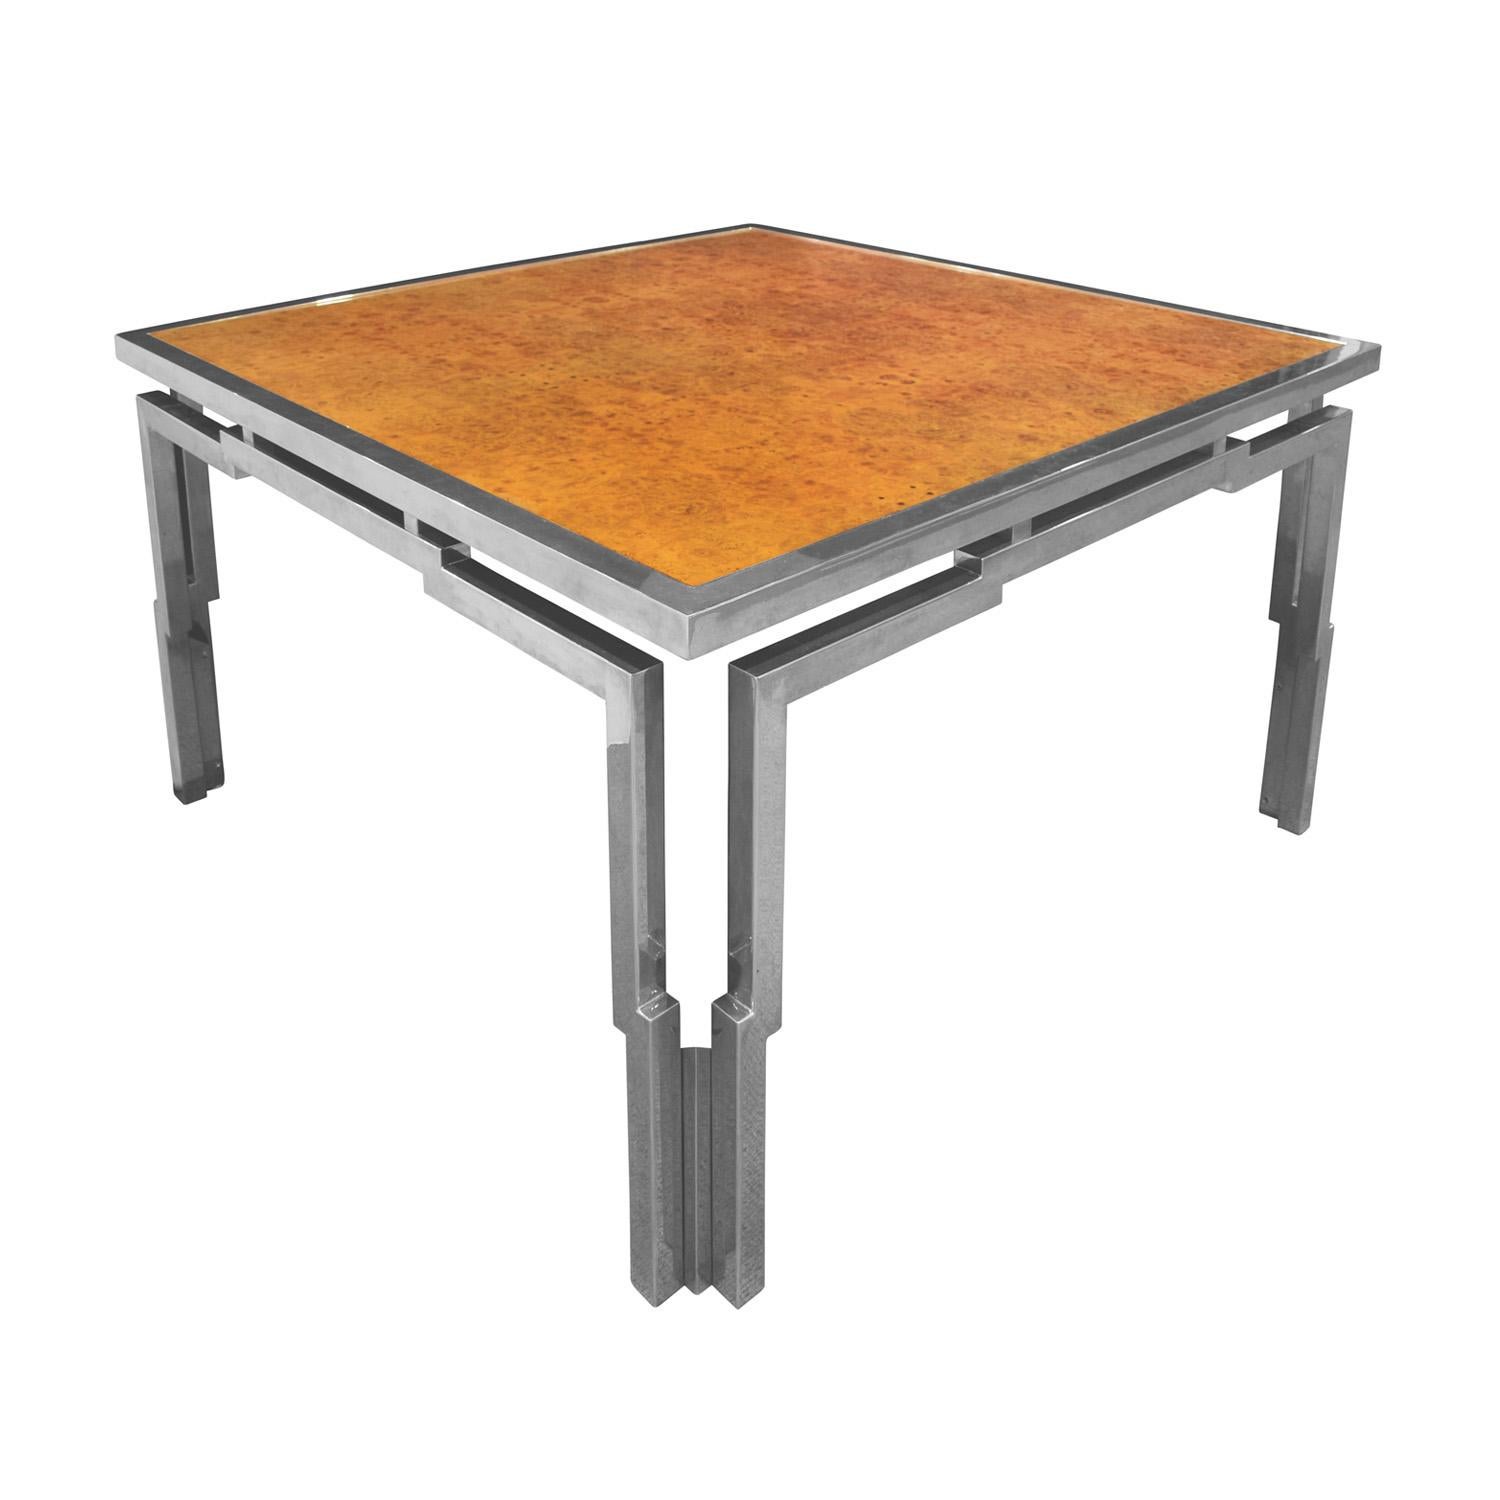 Square dining table in chrome with inset mirror polished book-matched burl wood top by Willy Rizzo, Italian 1970's. This is a very cool design. We have the matching dining chairs (see photo) that were made to go with this table. They are sold